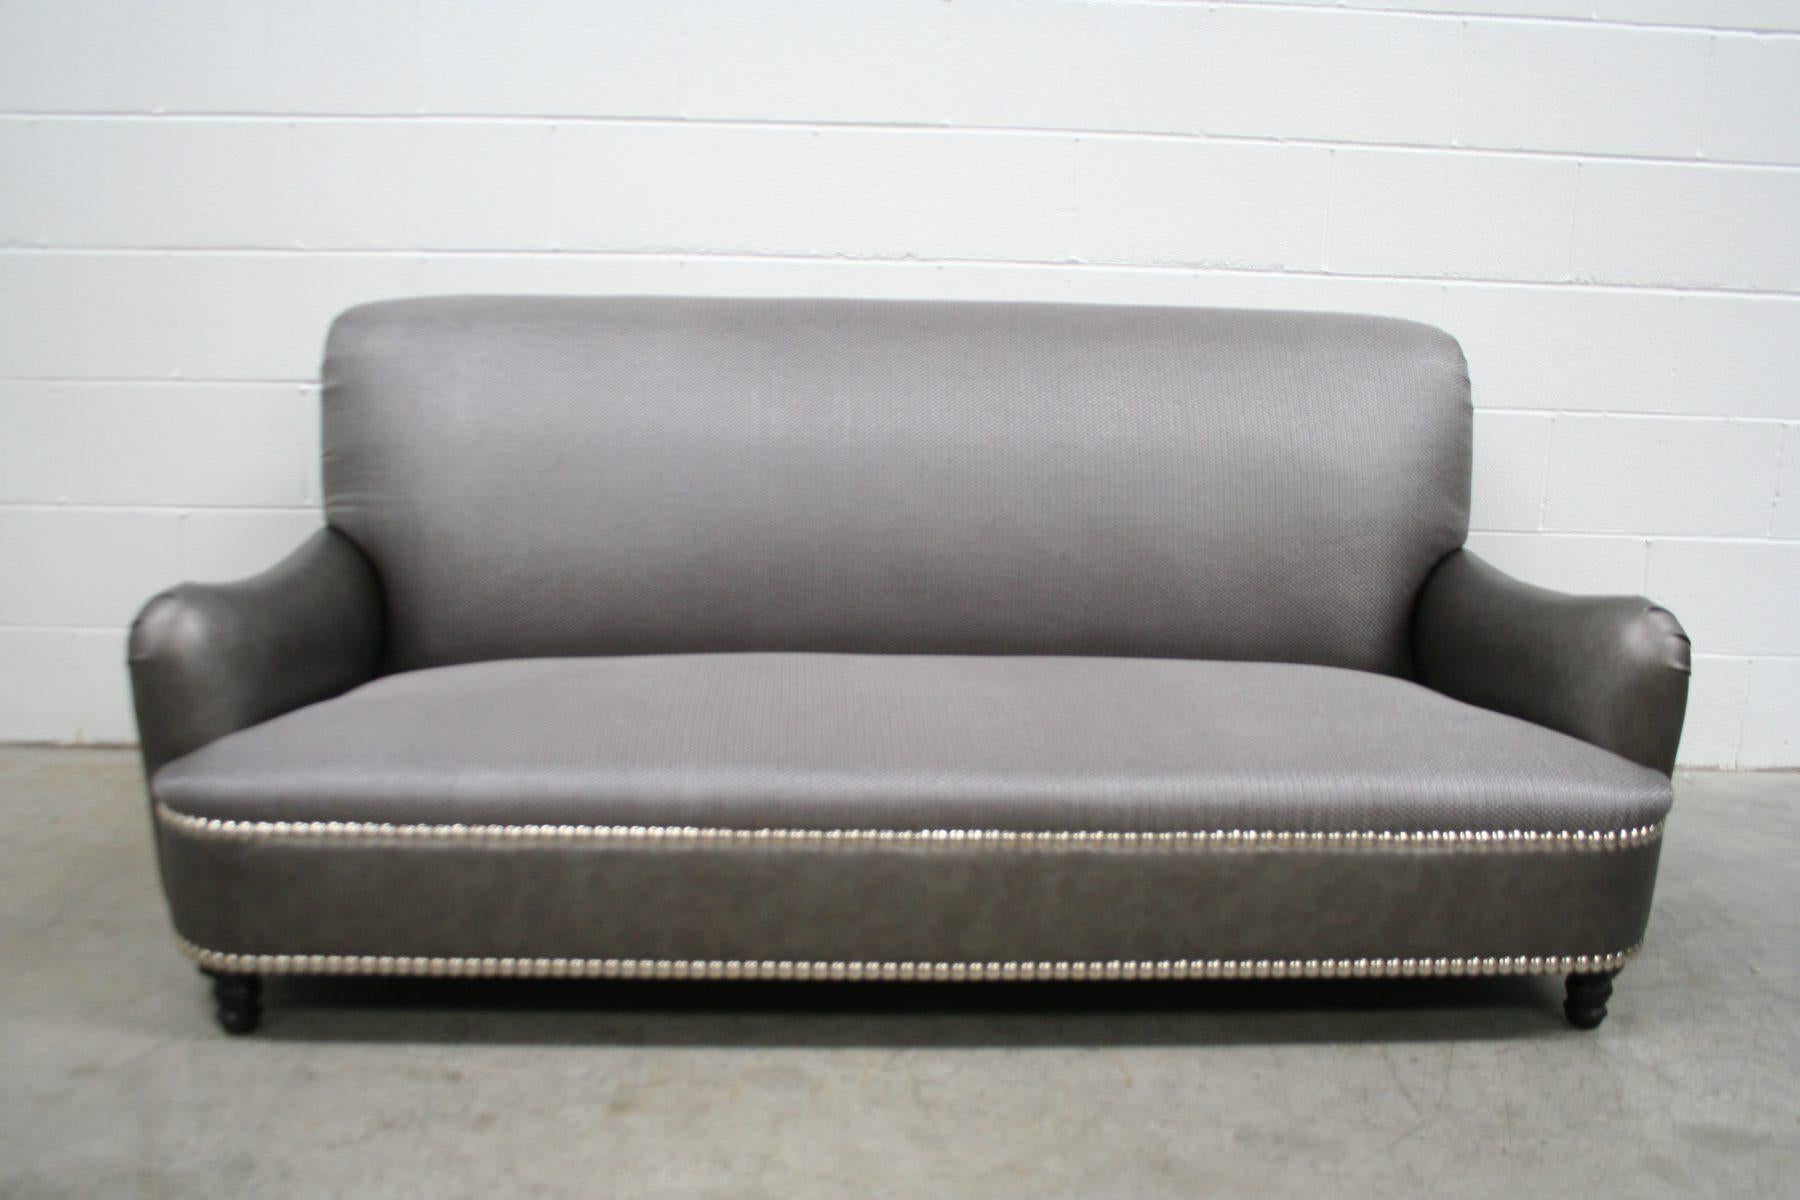 A rare opportunity to acquire what is, unequivocally, the most spectacular, immaculate, beautifully-presented Fixed-Seat 3-Seat “Jules” sofa.

Recently recovered by a private client in an impossibly-soft and tactile, woven Romo “Zinc” fabric (the